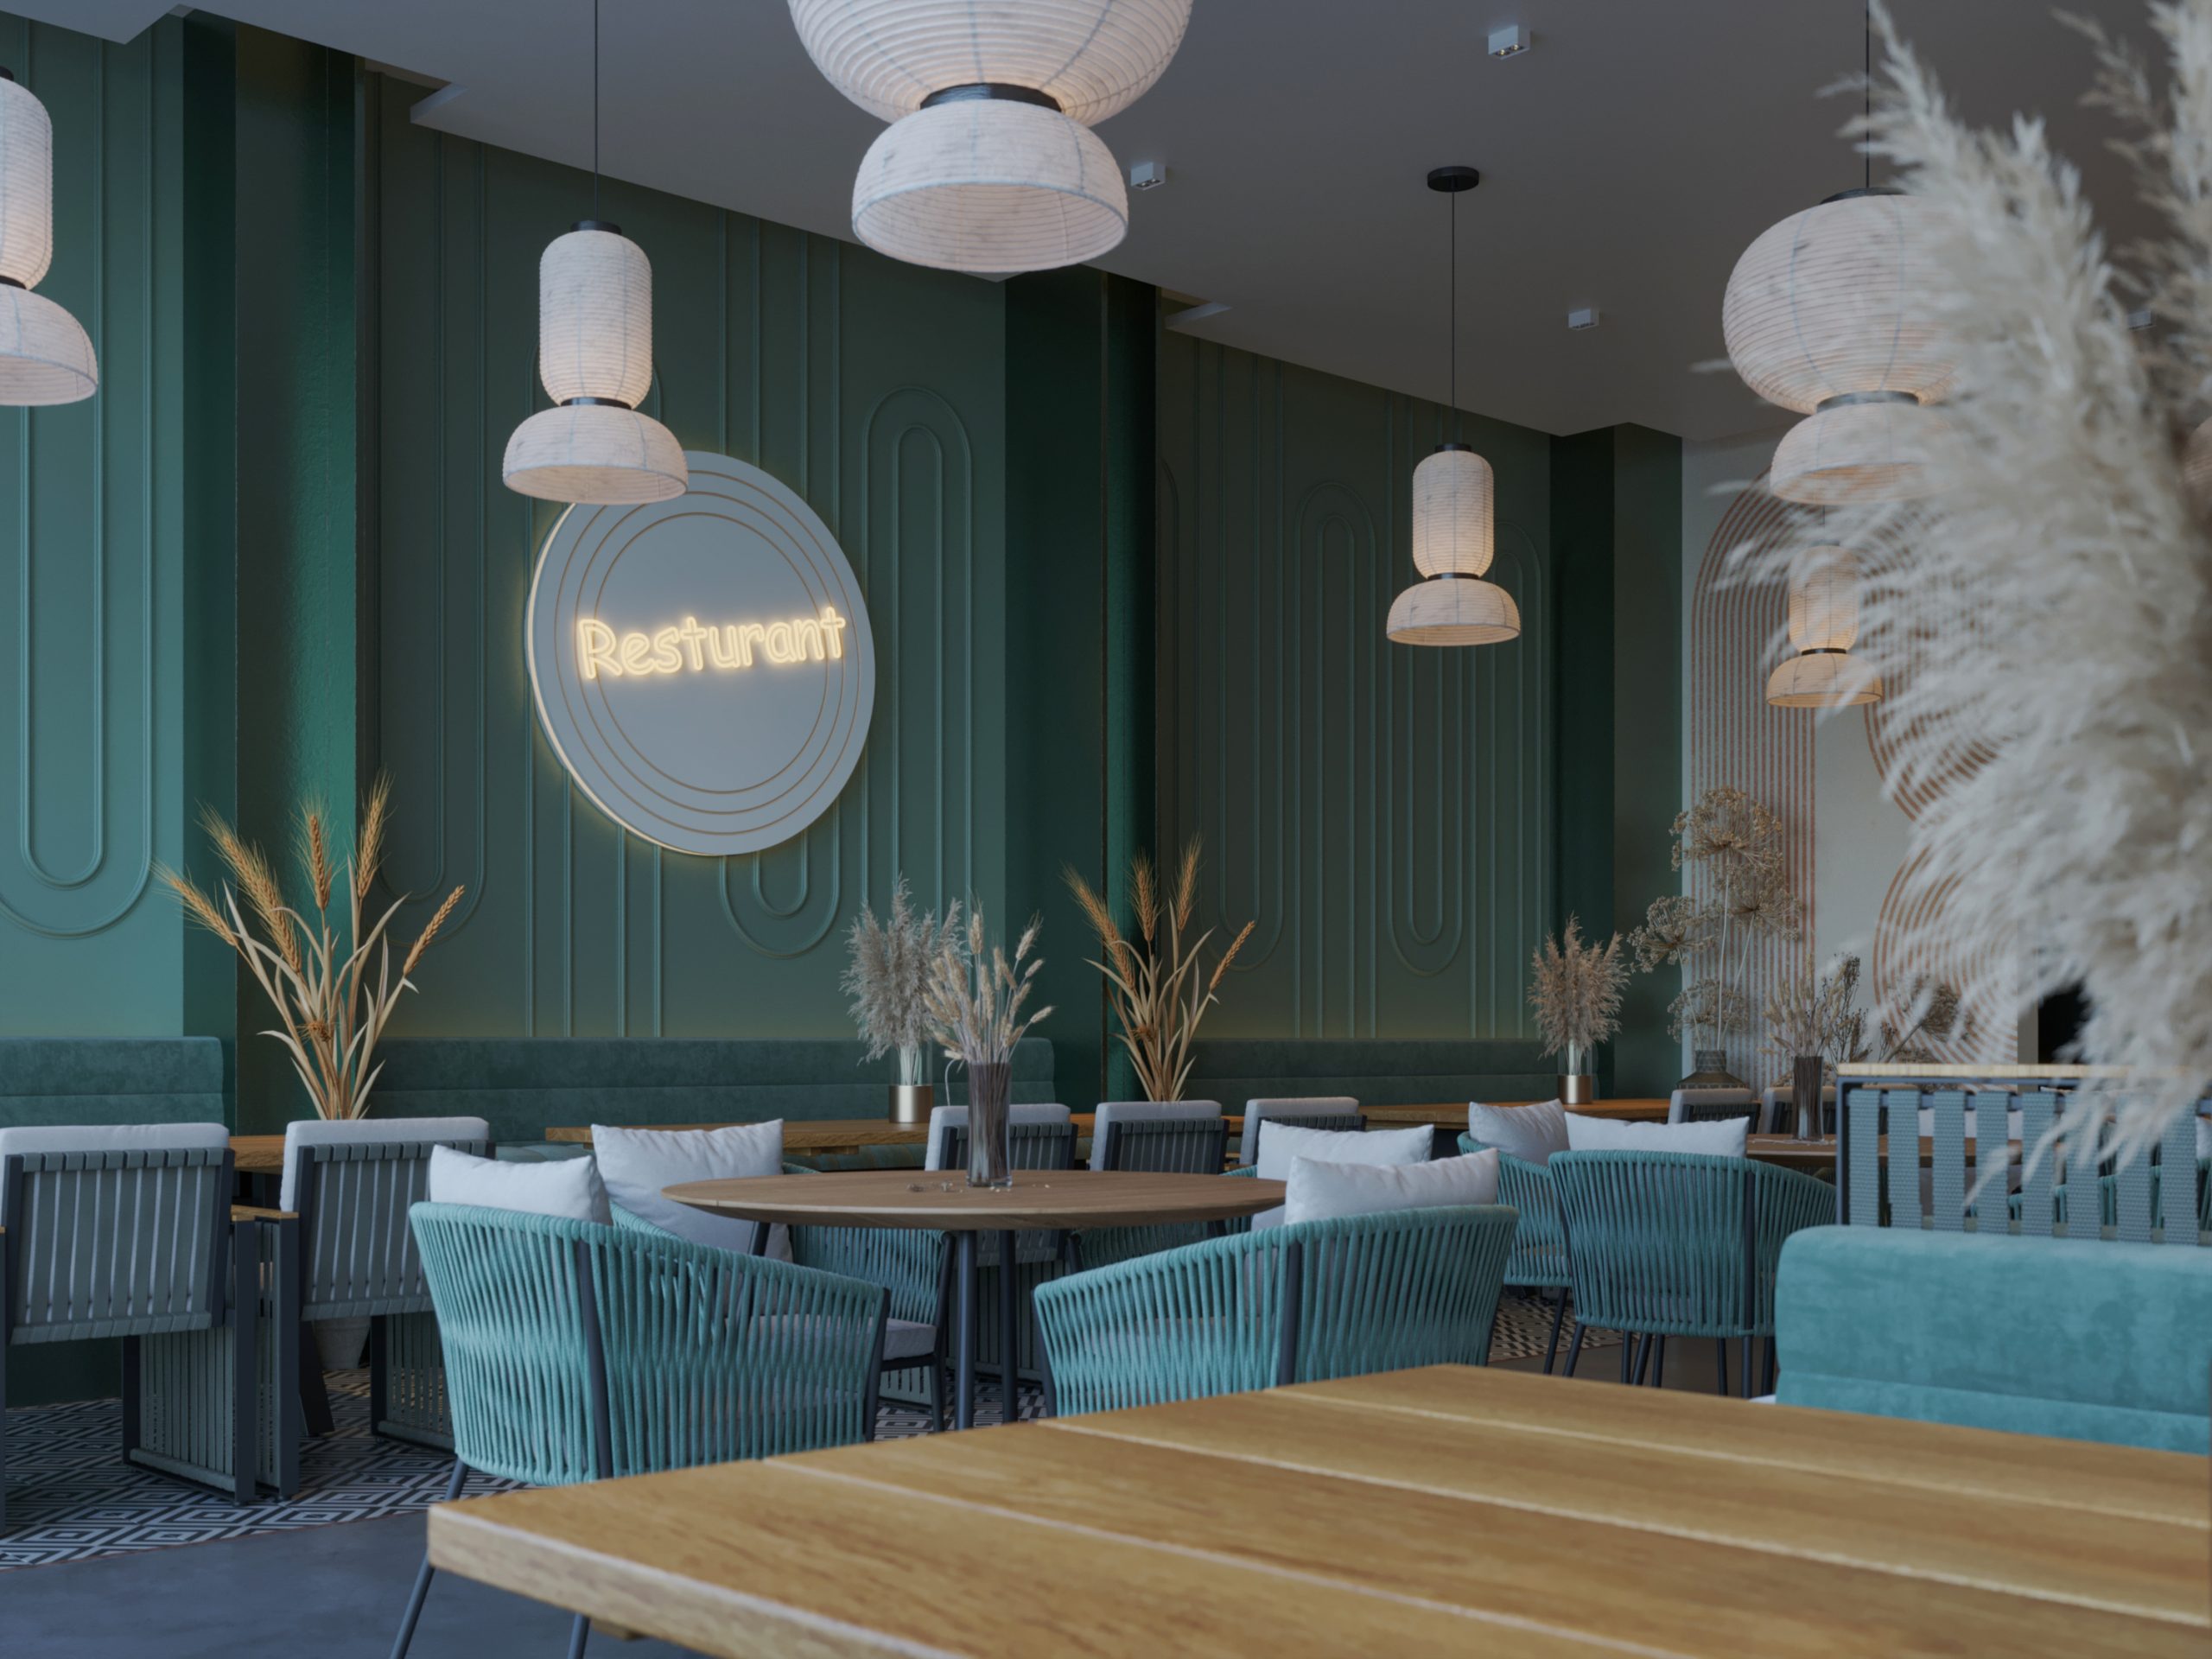 RESTURANT DESIGN IN TURQUOISE - RESTURANT design - lights - tables - chairs - hrarchz